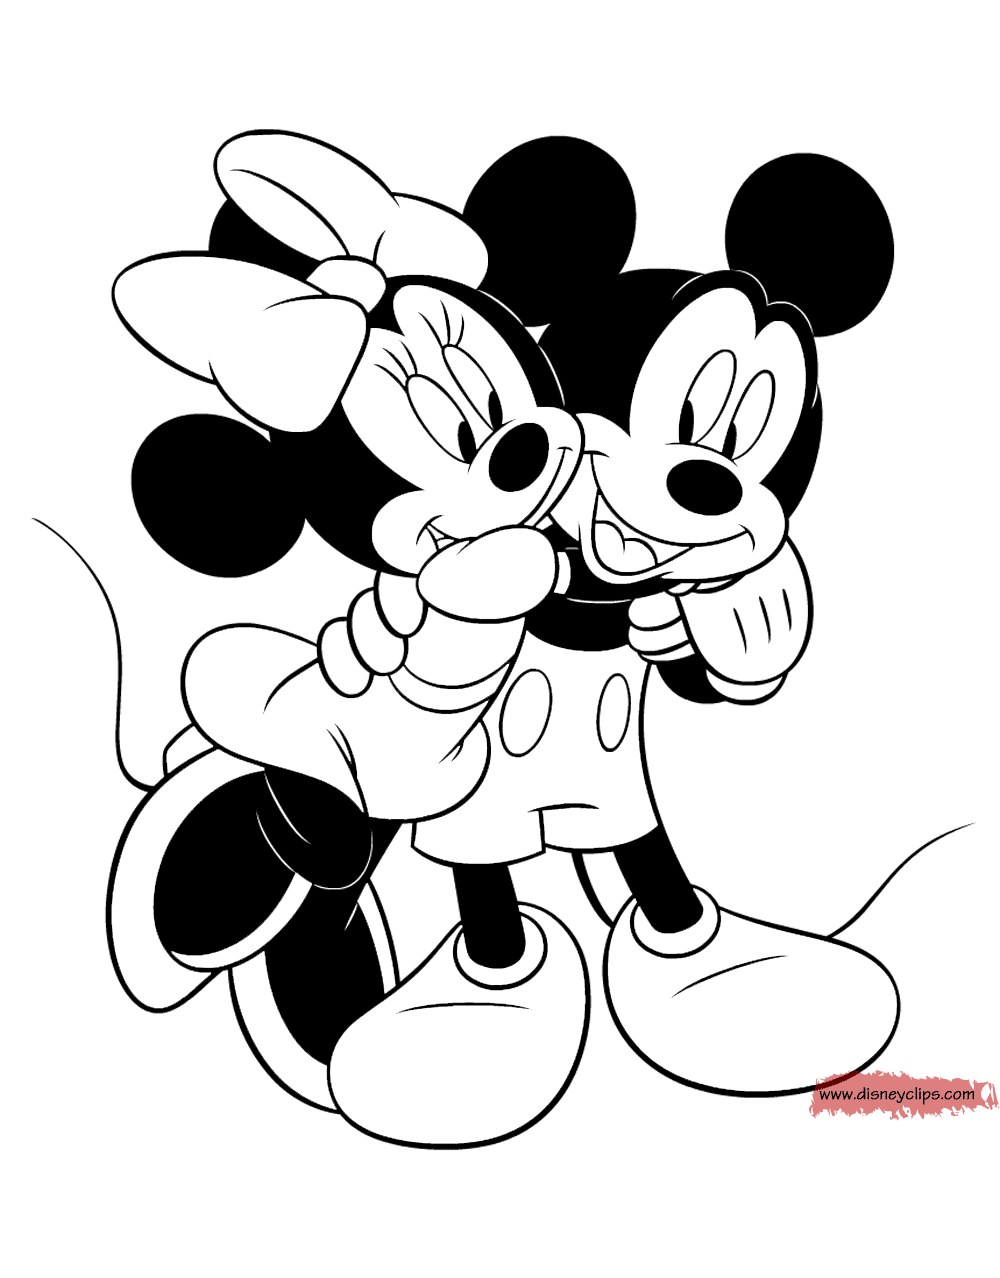 mickey mouse friends coloring pages disney coloring book mickey and minnie mouse coloring pages for christmas